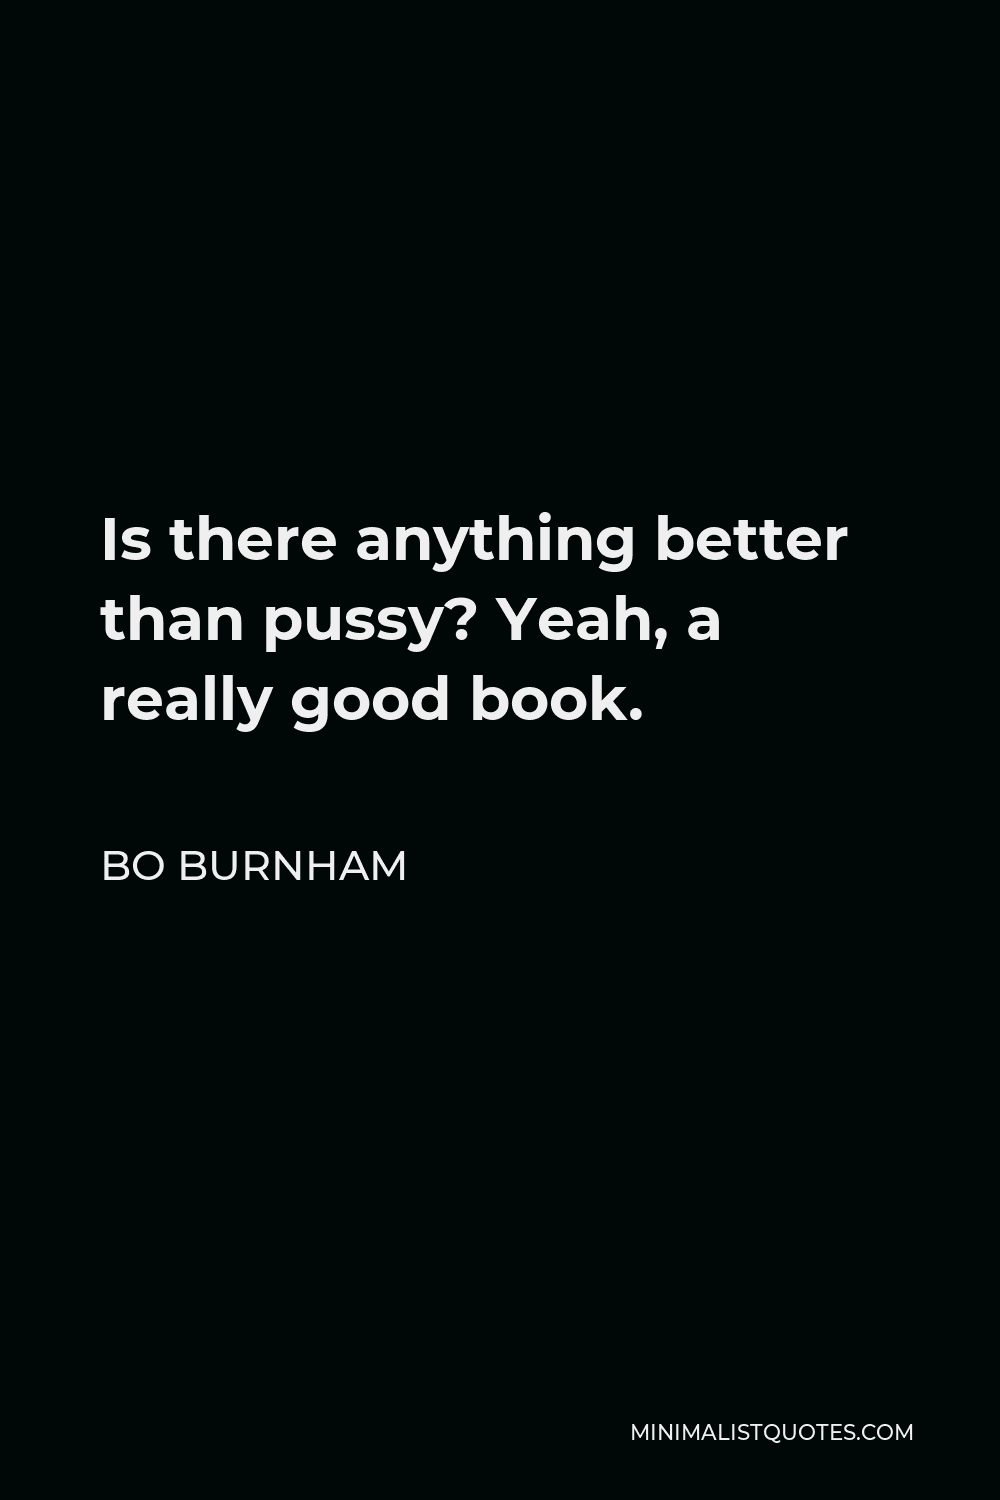 Bo Burnham Quote - Is there anything better than pussy? Yeah, a really good book.